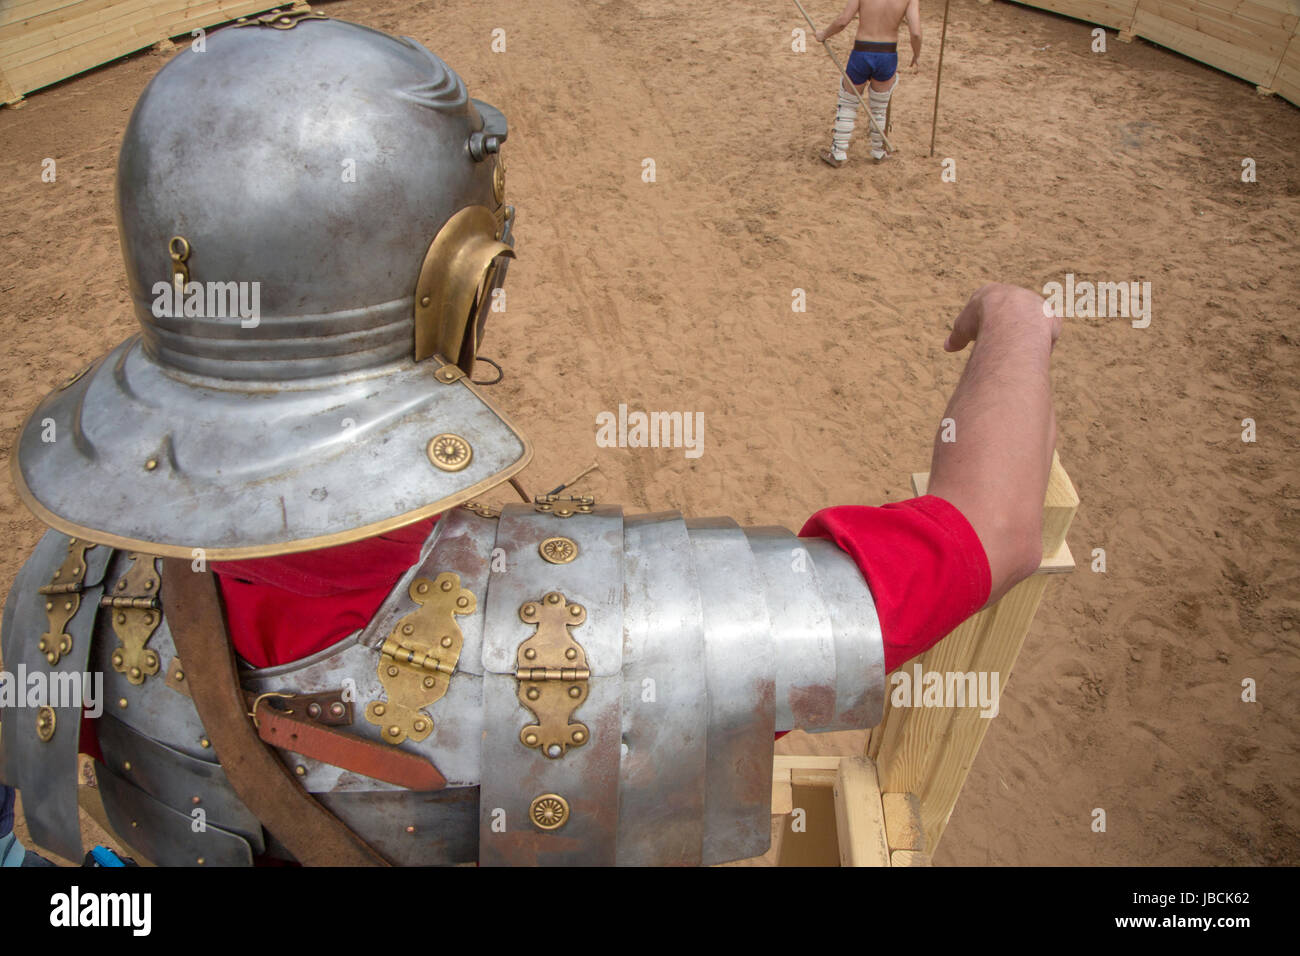 Moscow, Russia. 10th June, 2017. Participants in a historical reenactment at the 'Ancient Rome and Its Neighbours' venue as part of a festival of historical reenactments titled 'Times and Epochs. The Gathering' in Moscow's Kolomenskoye historical and nature reserve museum. Credit: Nikolay Vinokurov/Alamy Live News Stock Photo